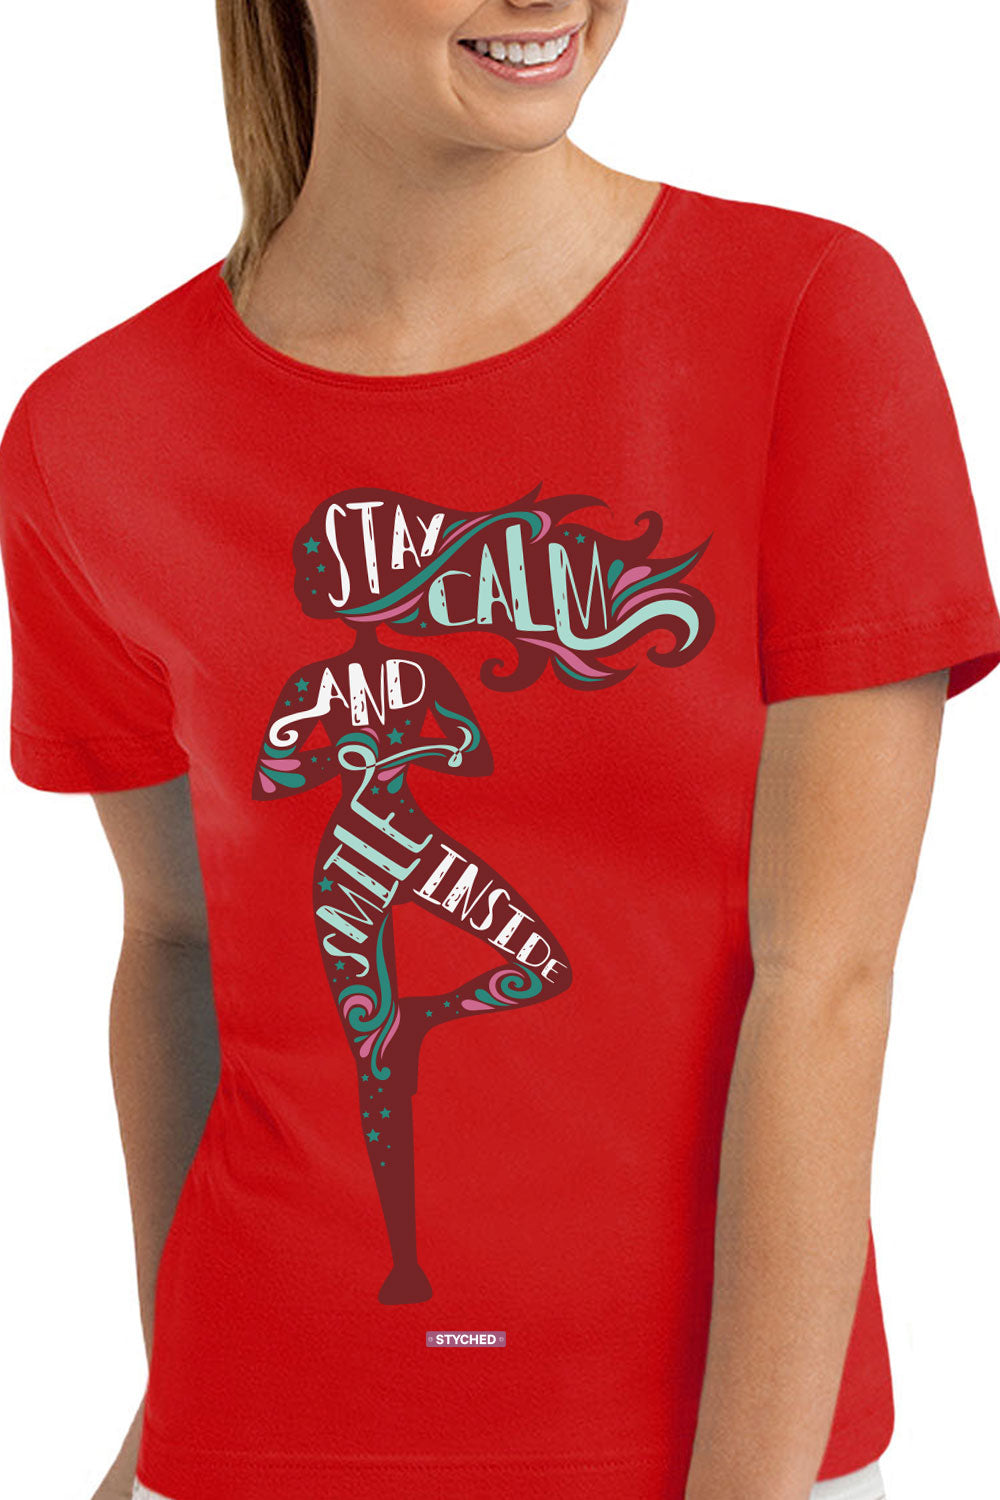 Stay Calm and Smile Inside - Quirky Graphic T-Shirt Red Color